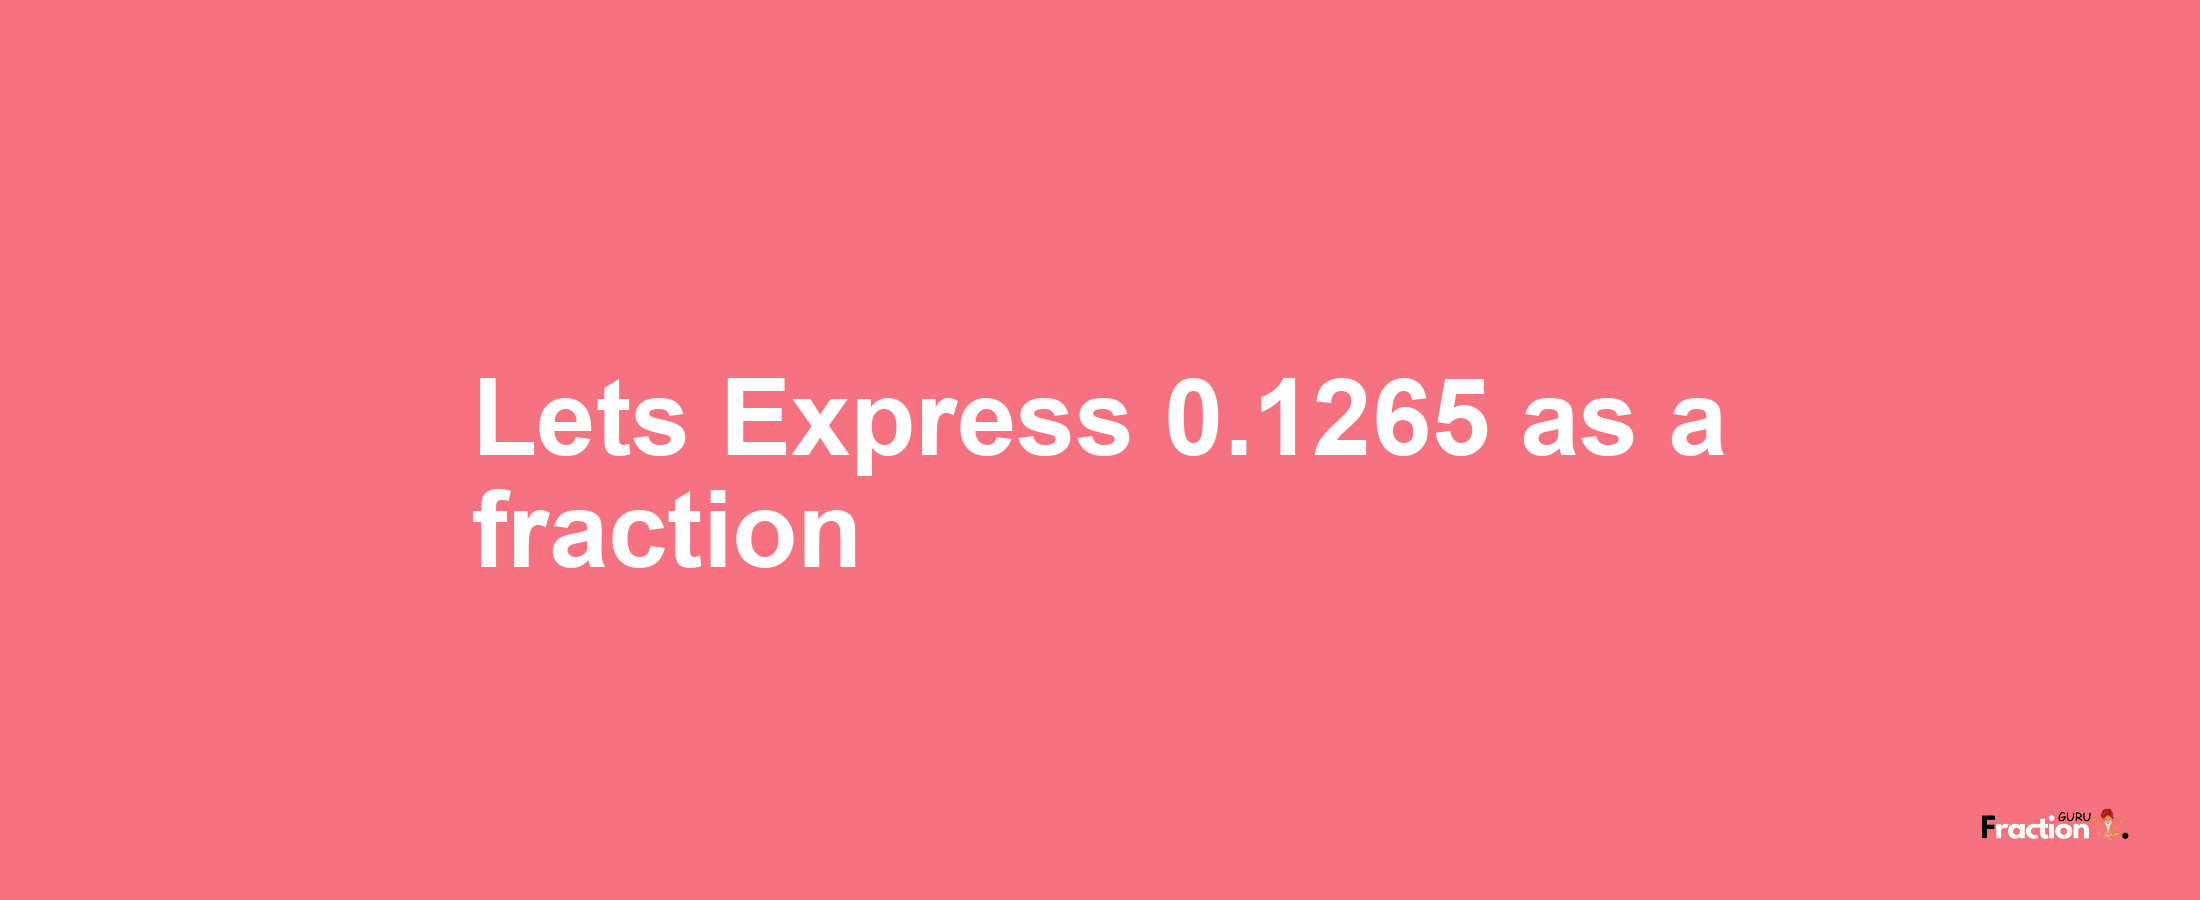 Lets Express 0.1265 as afraction